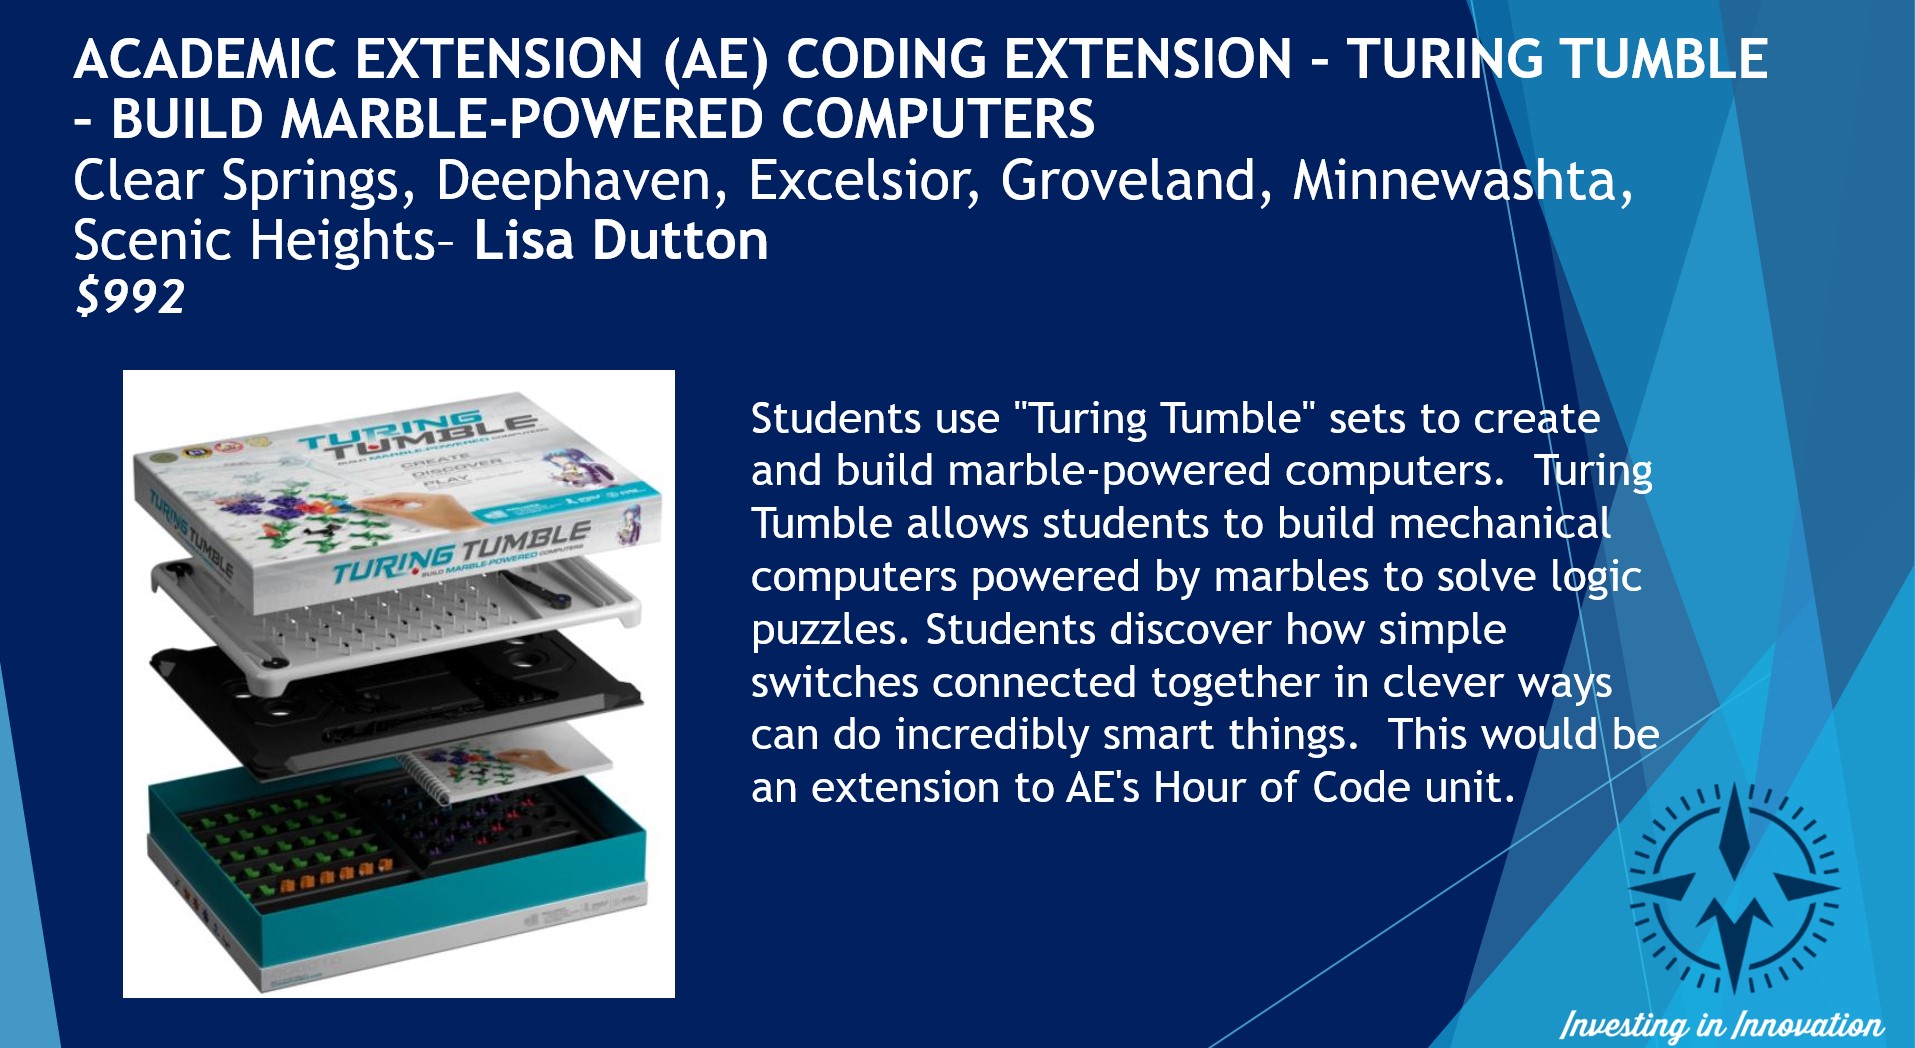 AE Coding Extension Turing Tumble